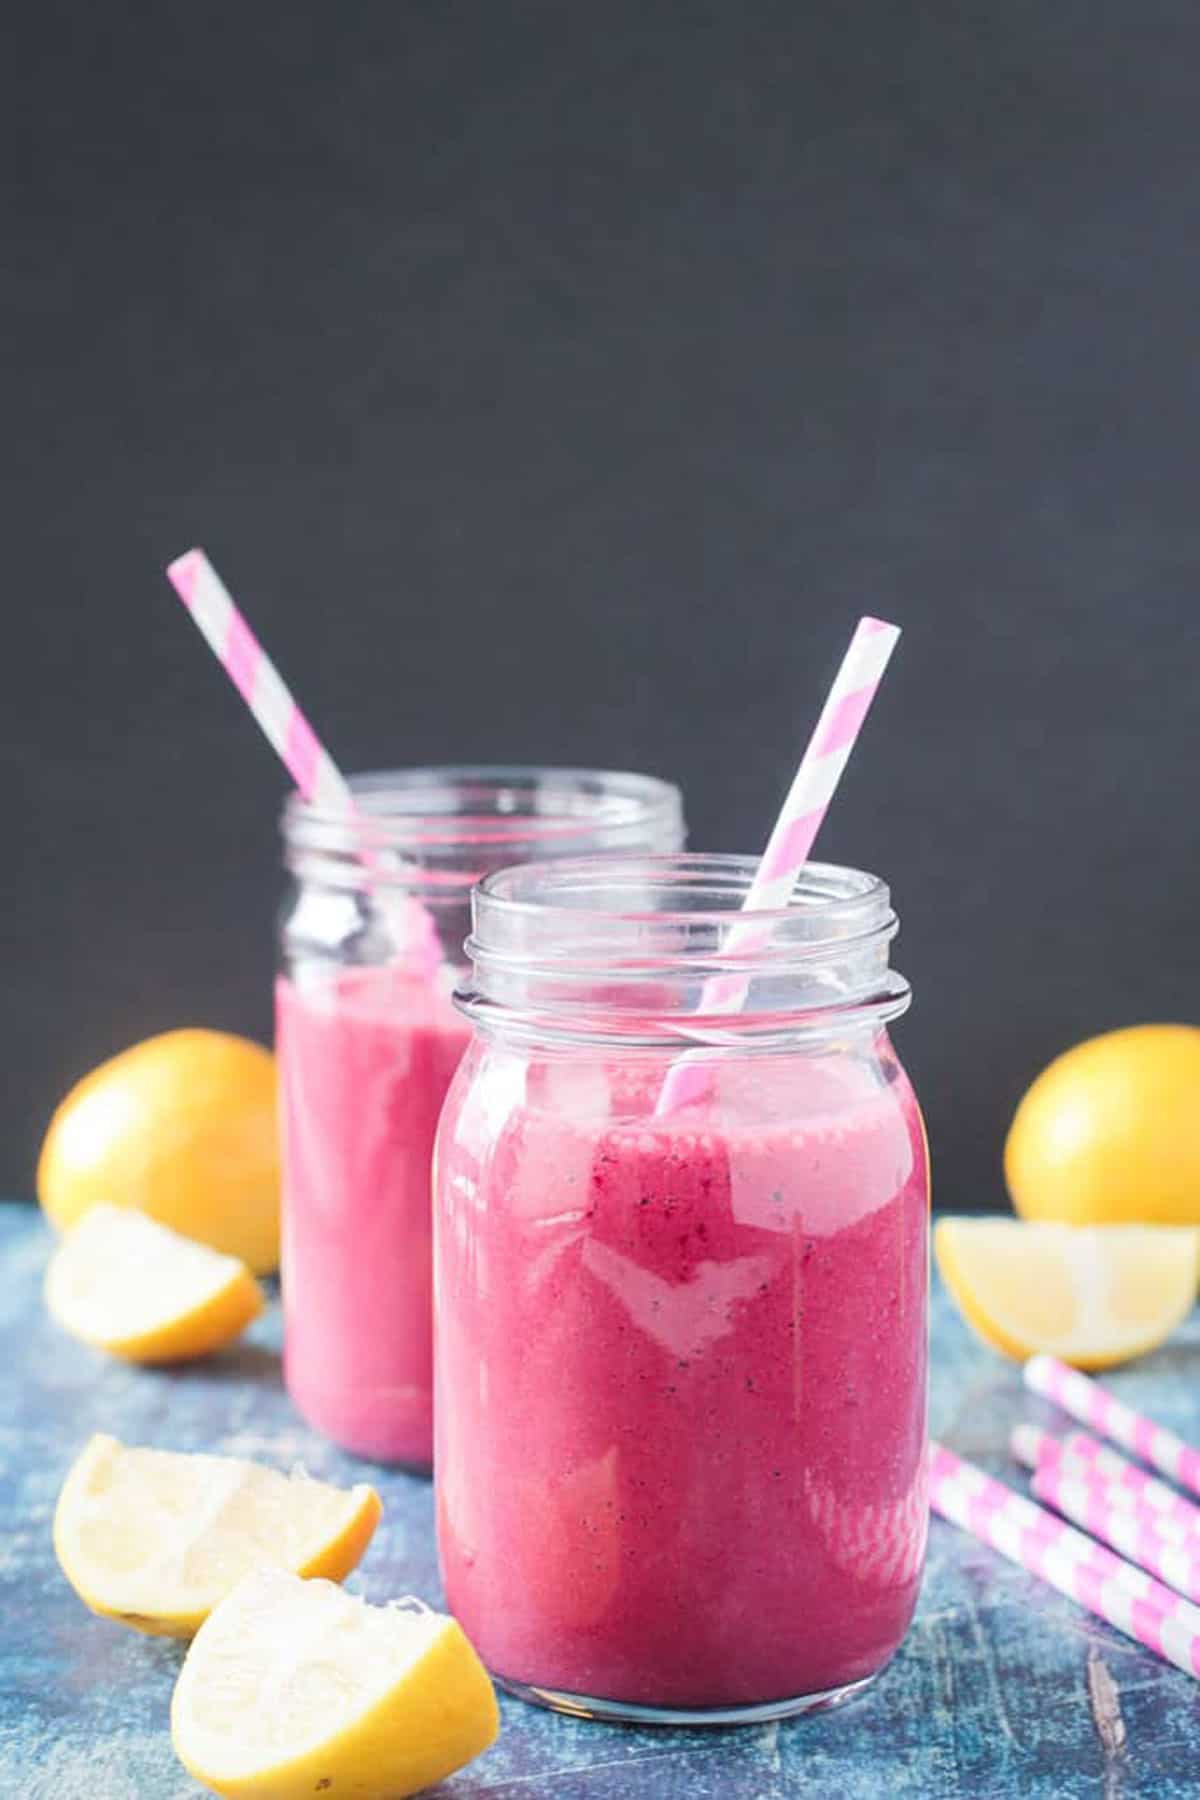 Two glass jars of pink smoothie with straws in each.